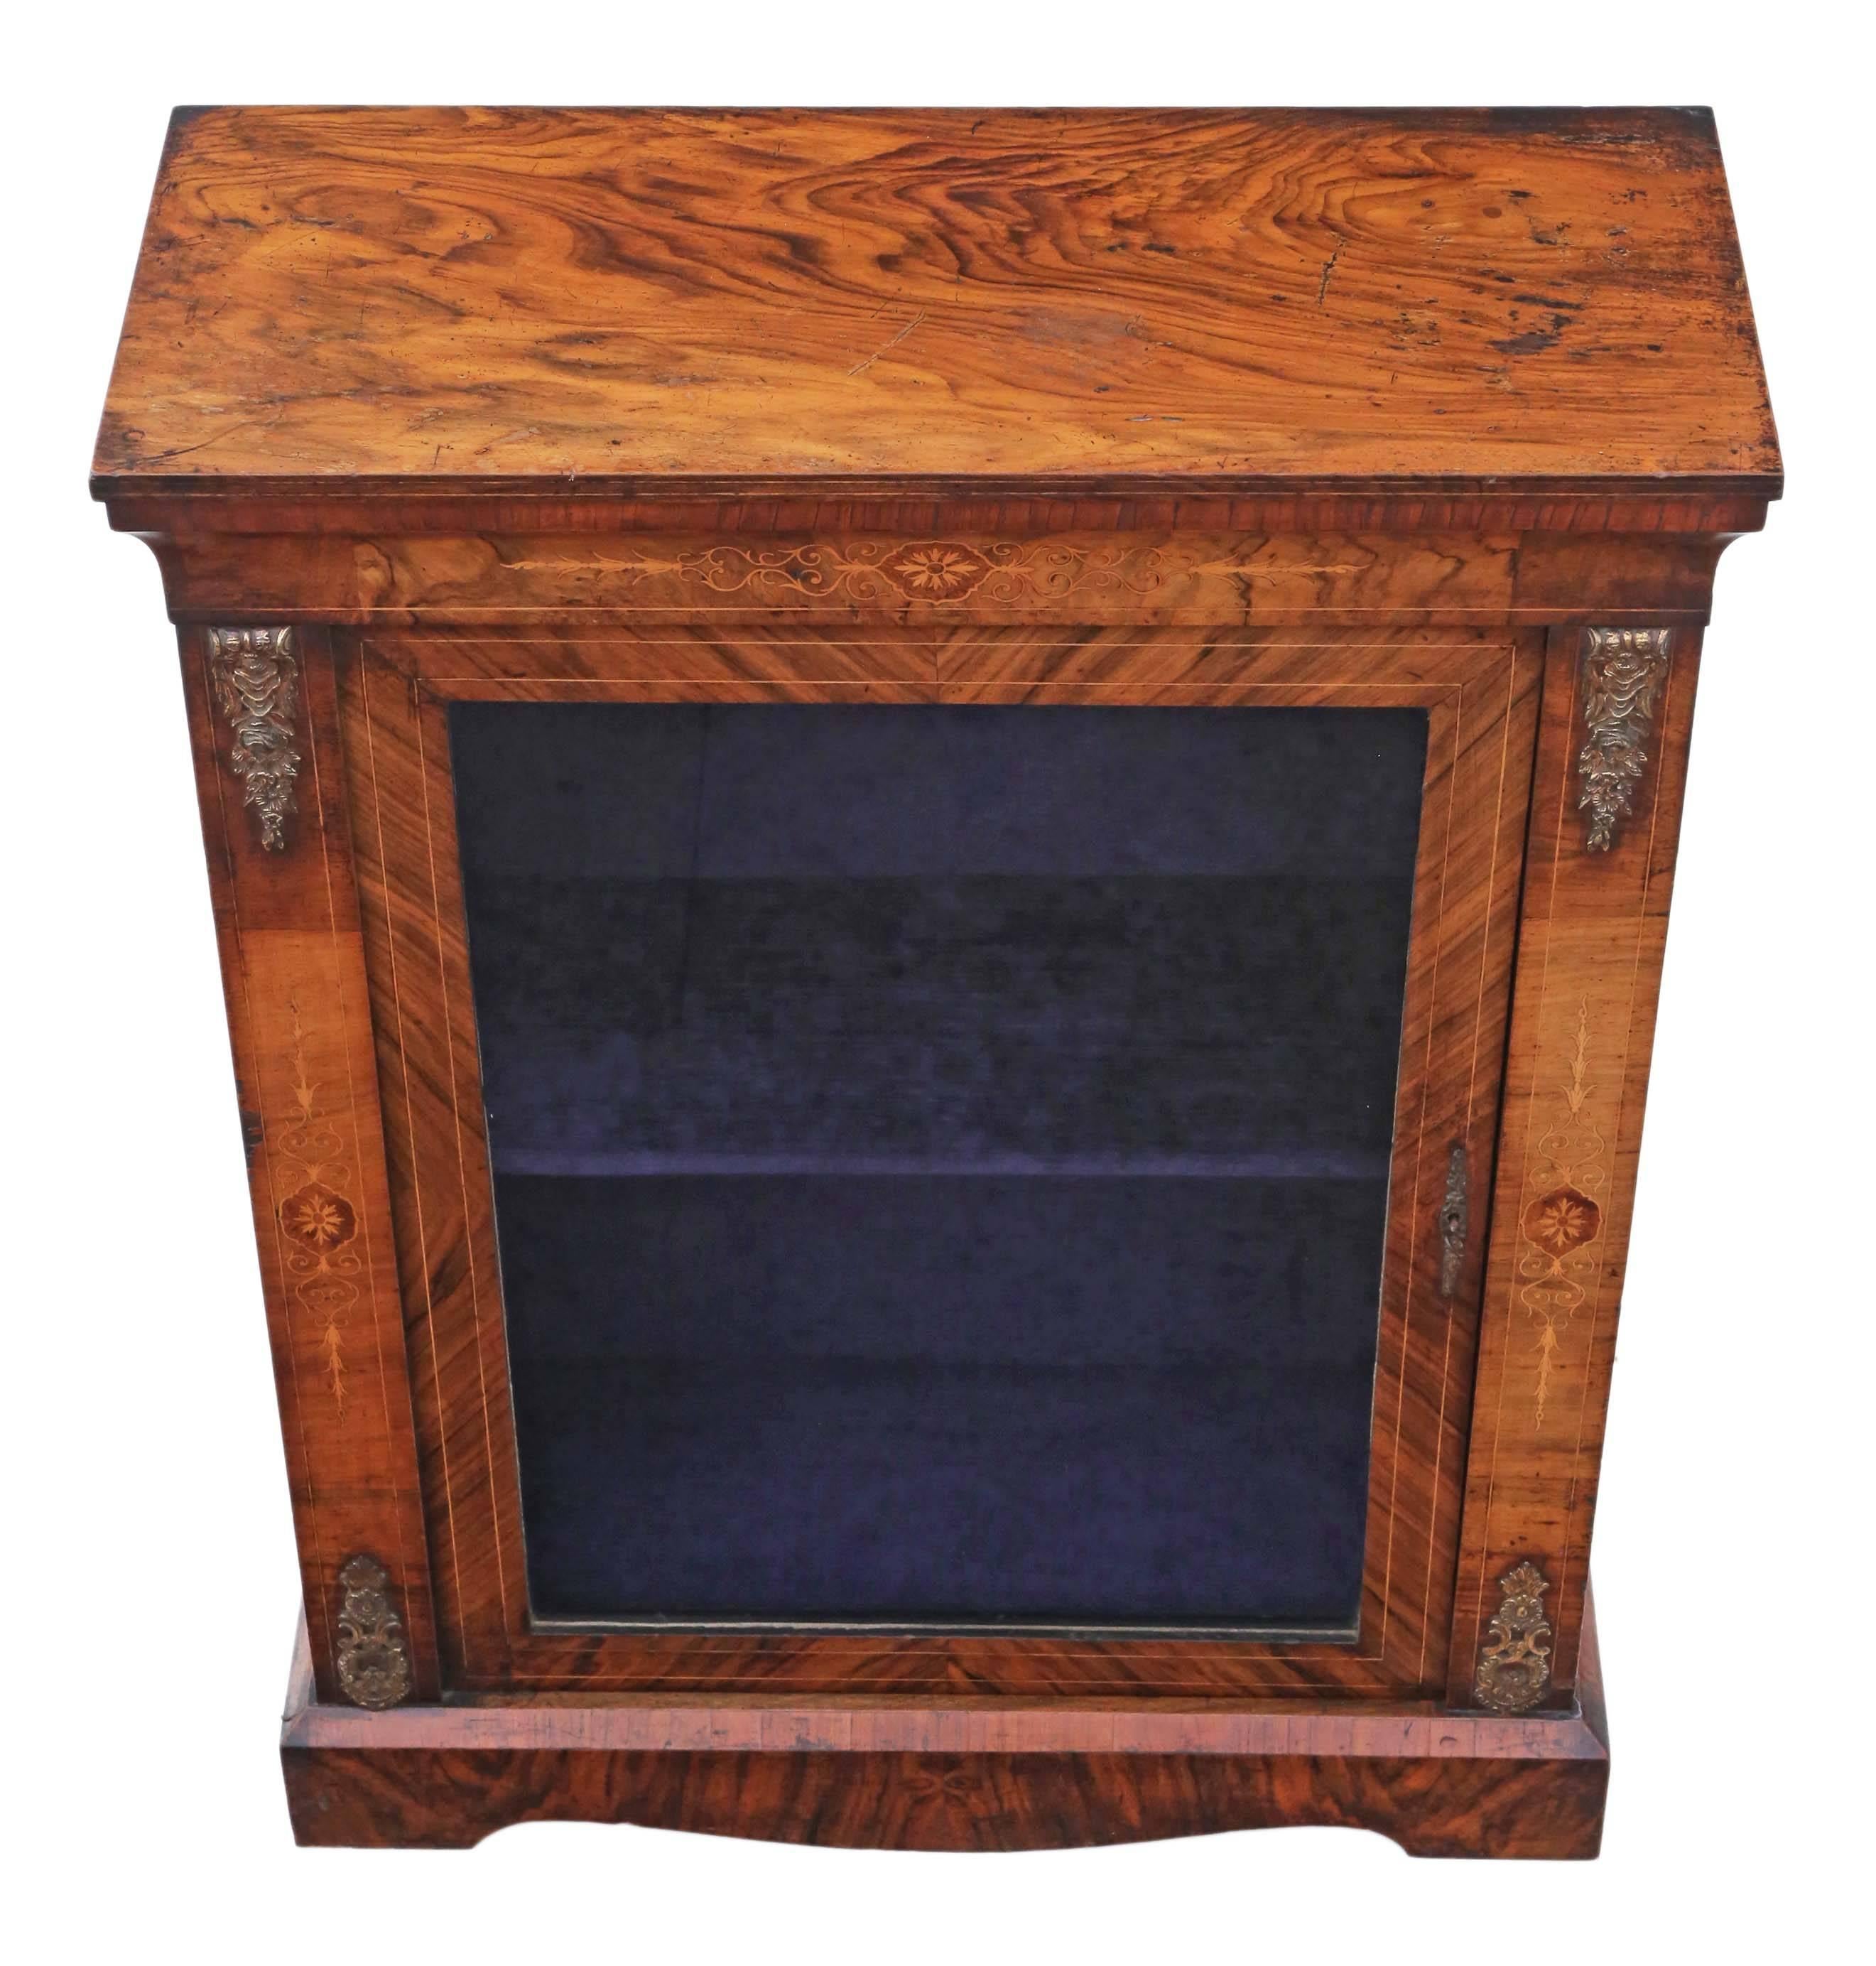 Antique quality inlaid burr walnut pier display cabinet, circa 1880. The best color and patina.

Solid and strong, with no loose joints. We have a key.

Would look great in the right location! No woodworm. New blue velour lining.

Overall